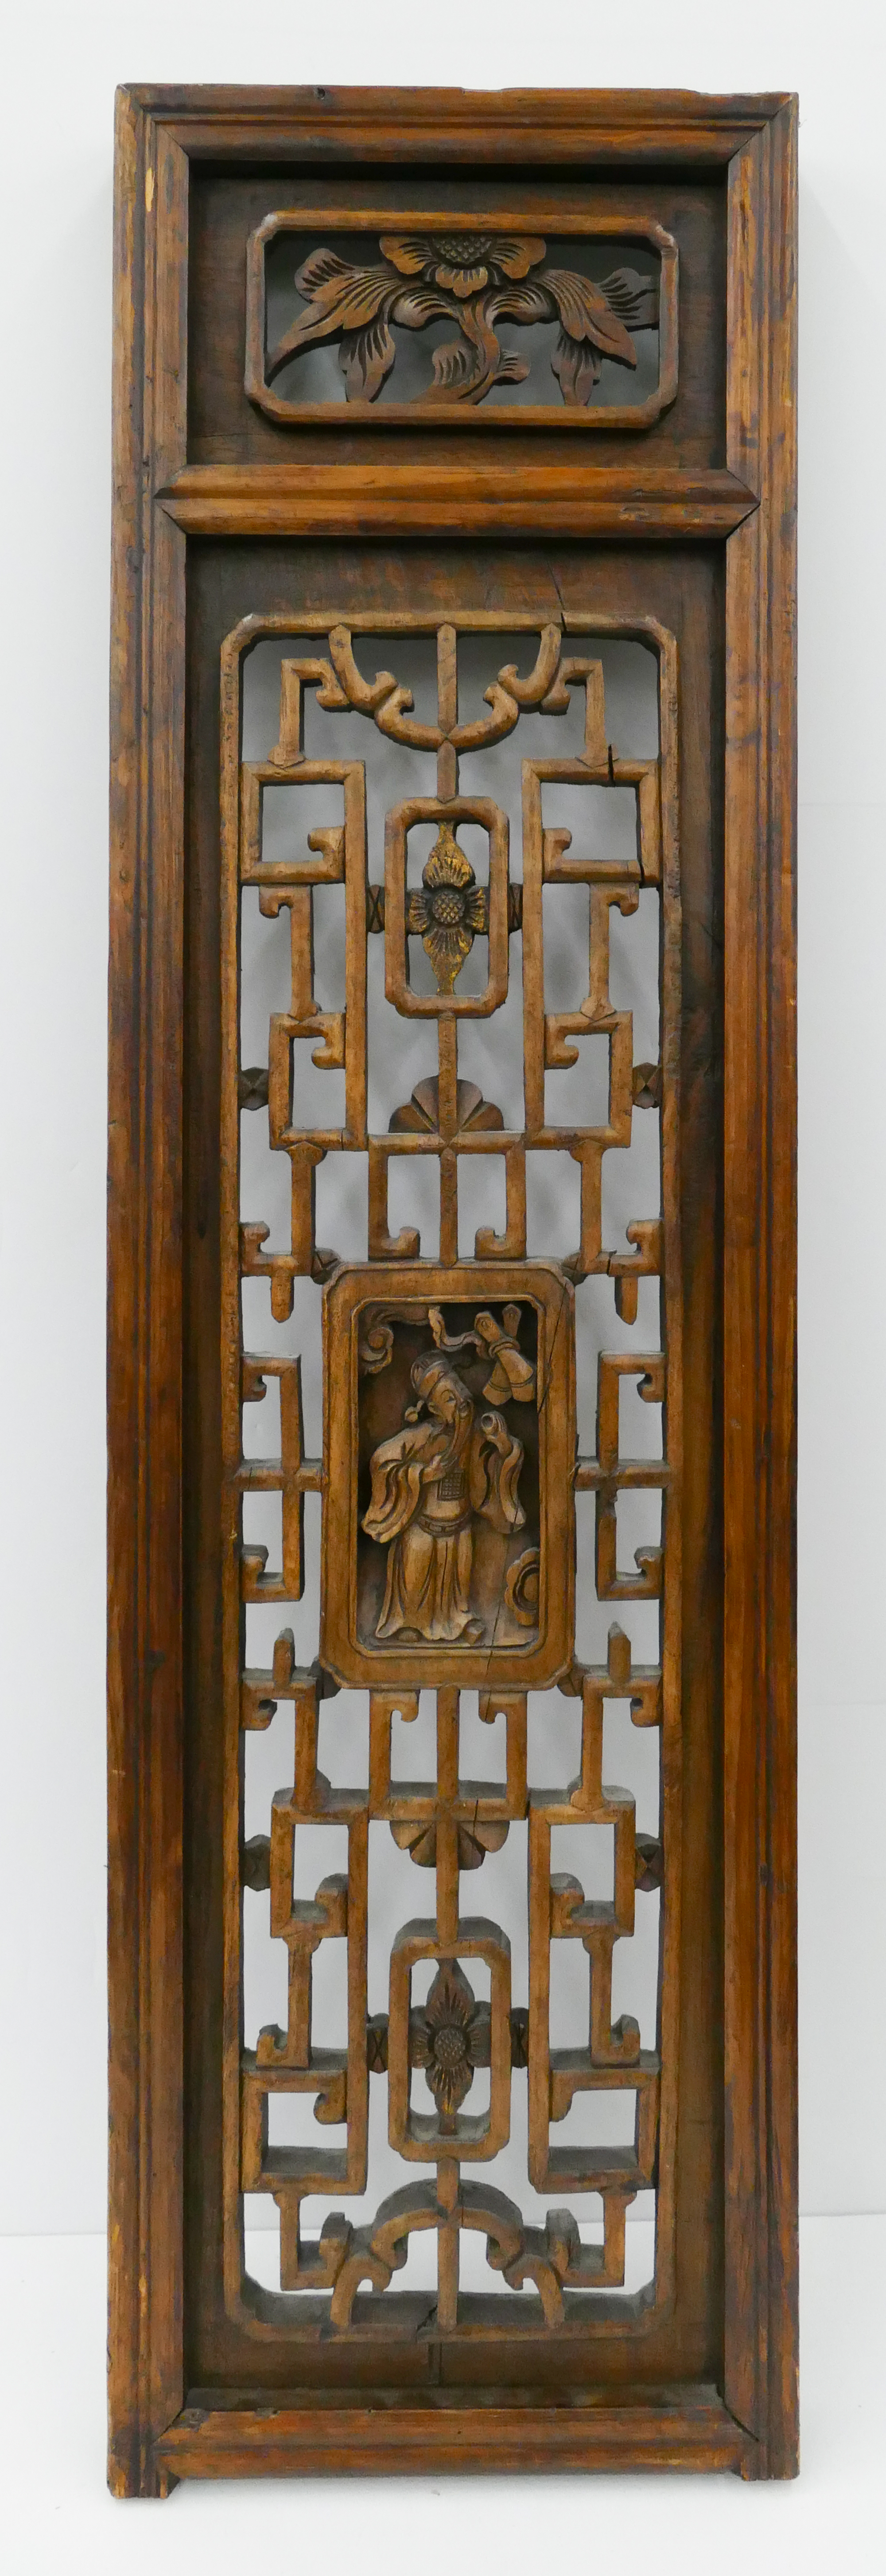 Old Chinese Elmwood Carved Window 2b0755